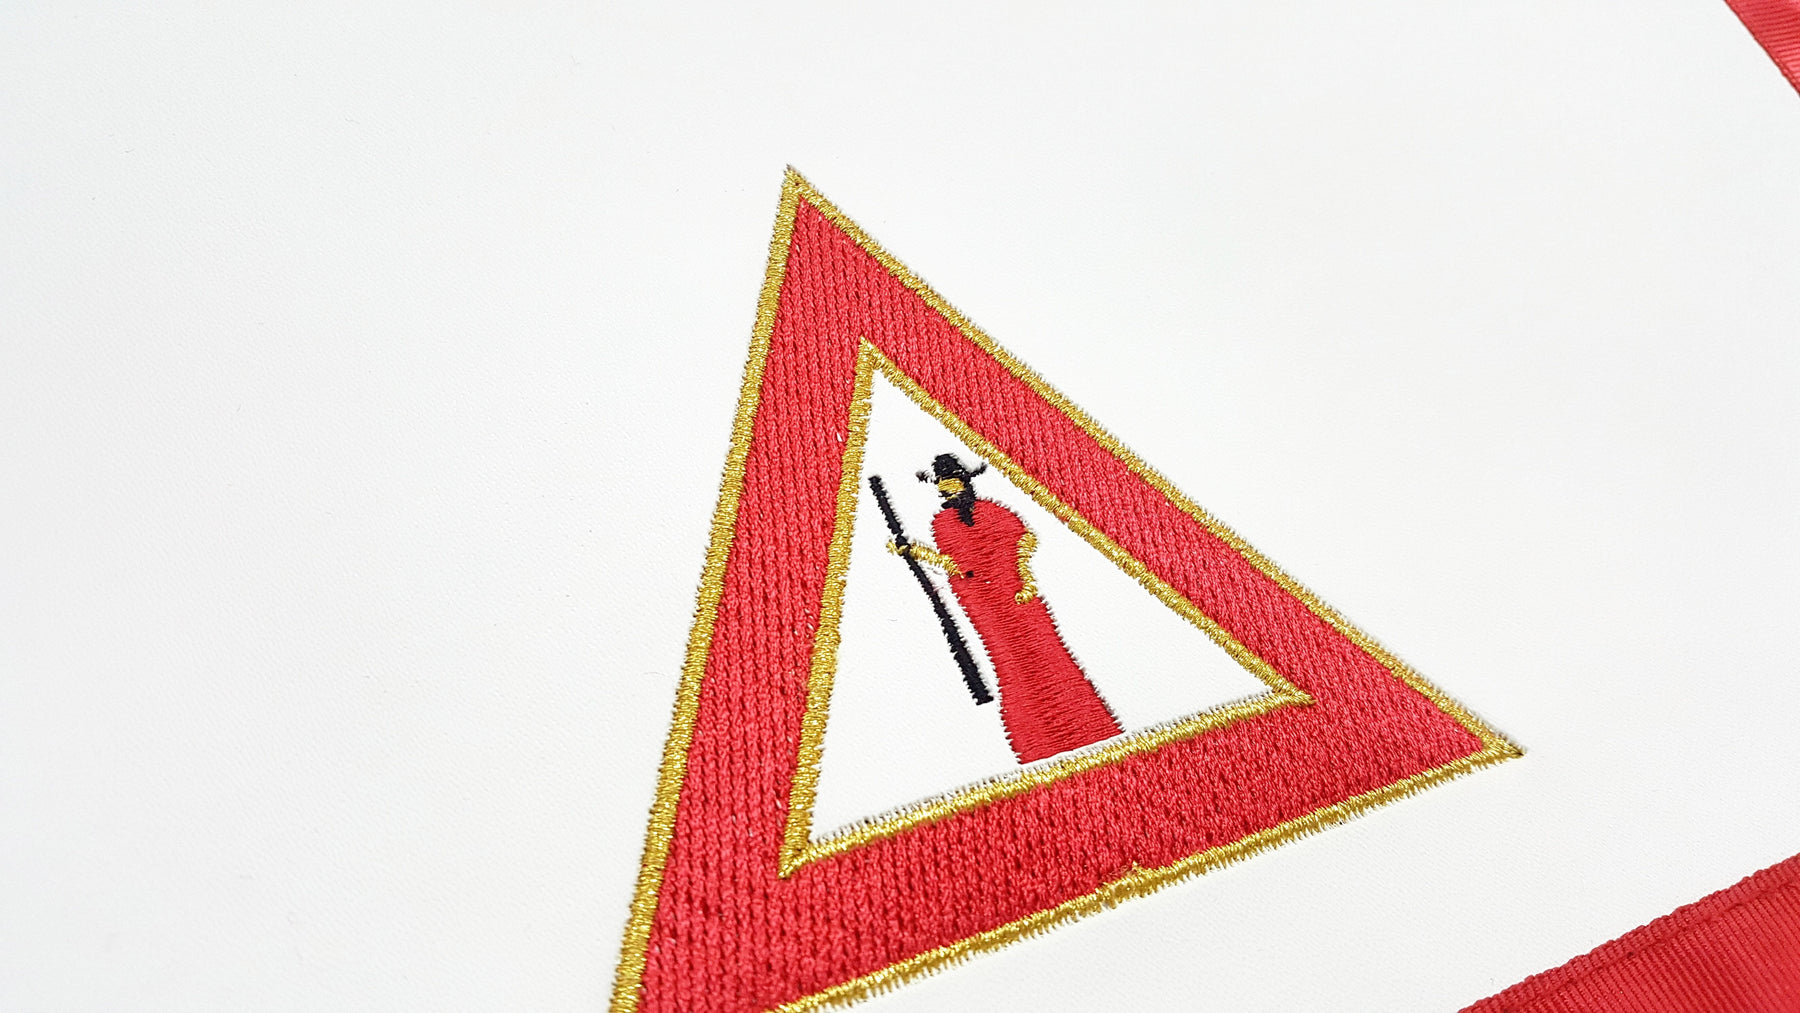 Principal Sojourner Royal Arch Chapter Apron - Red Machine Embroidery - Bricks Masons